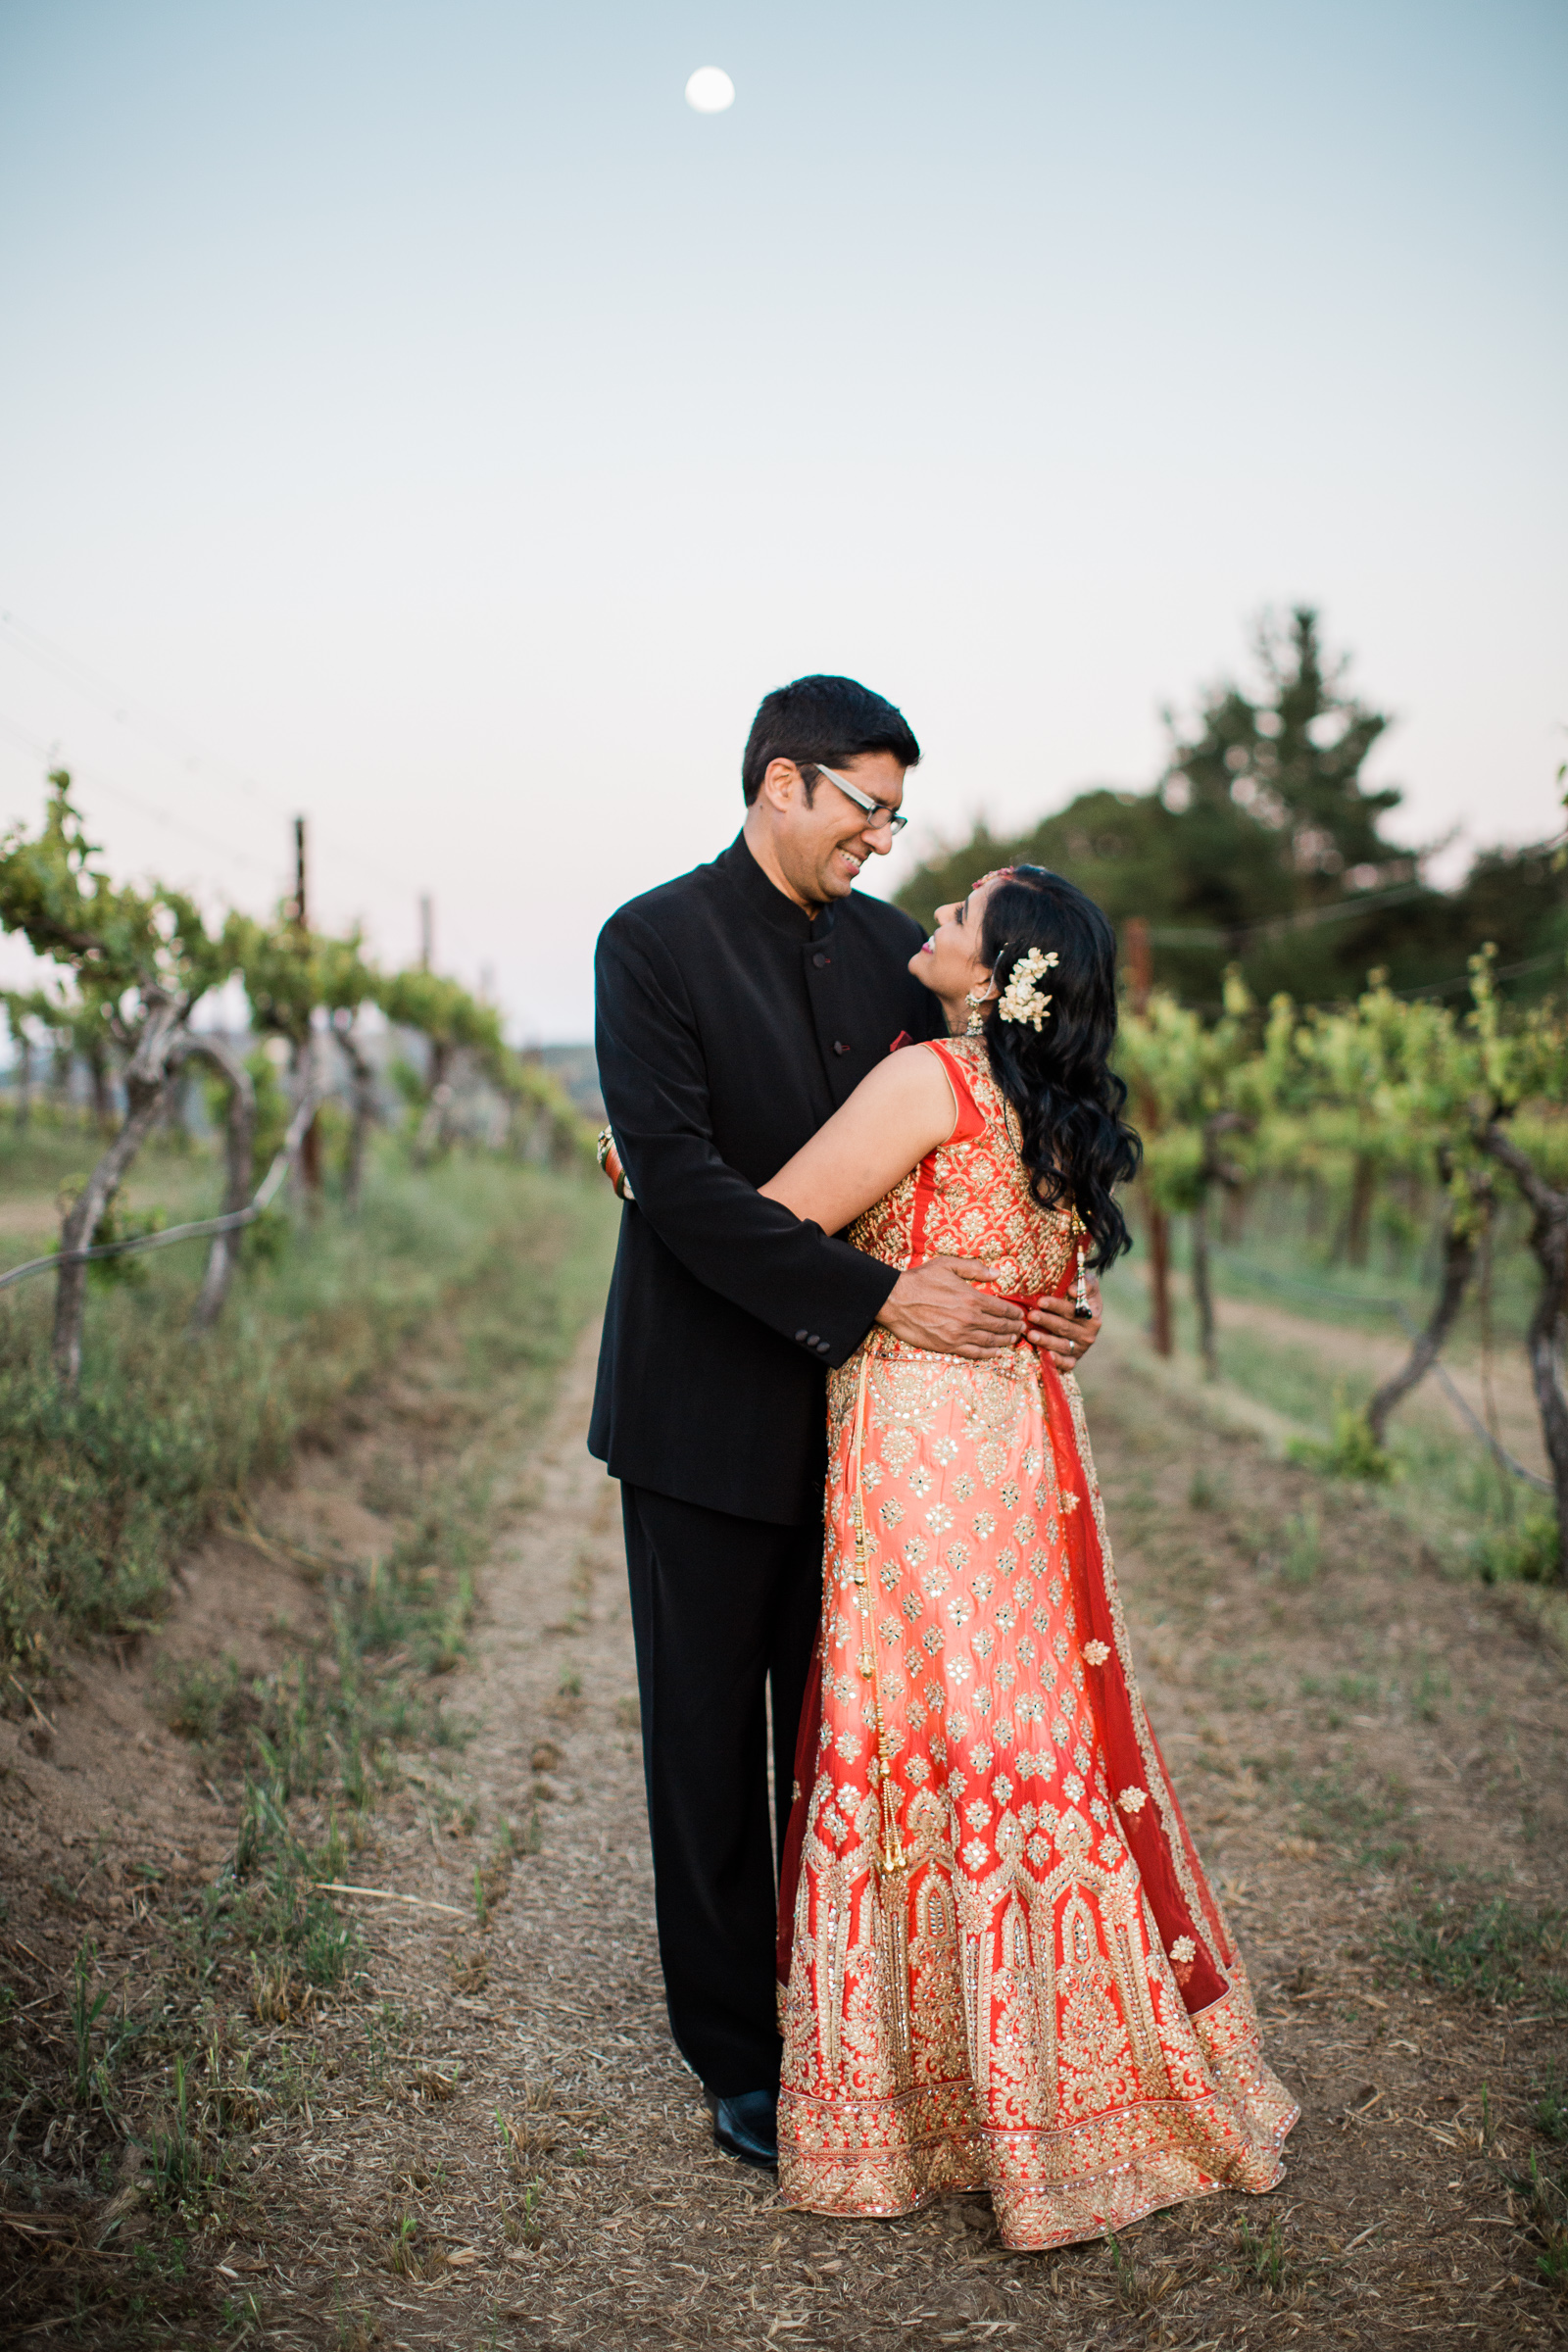 A wedding couple embraces while standing in a vineyard in a Manali Anne photo